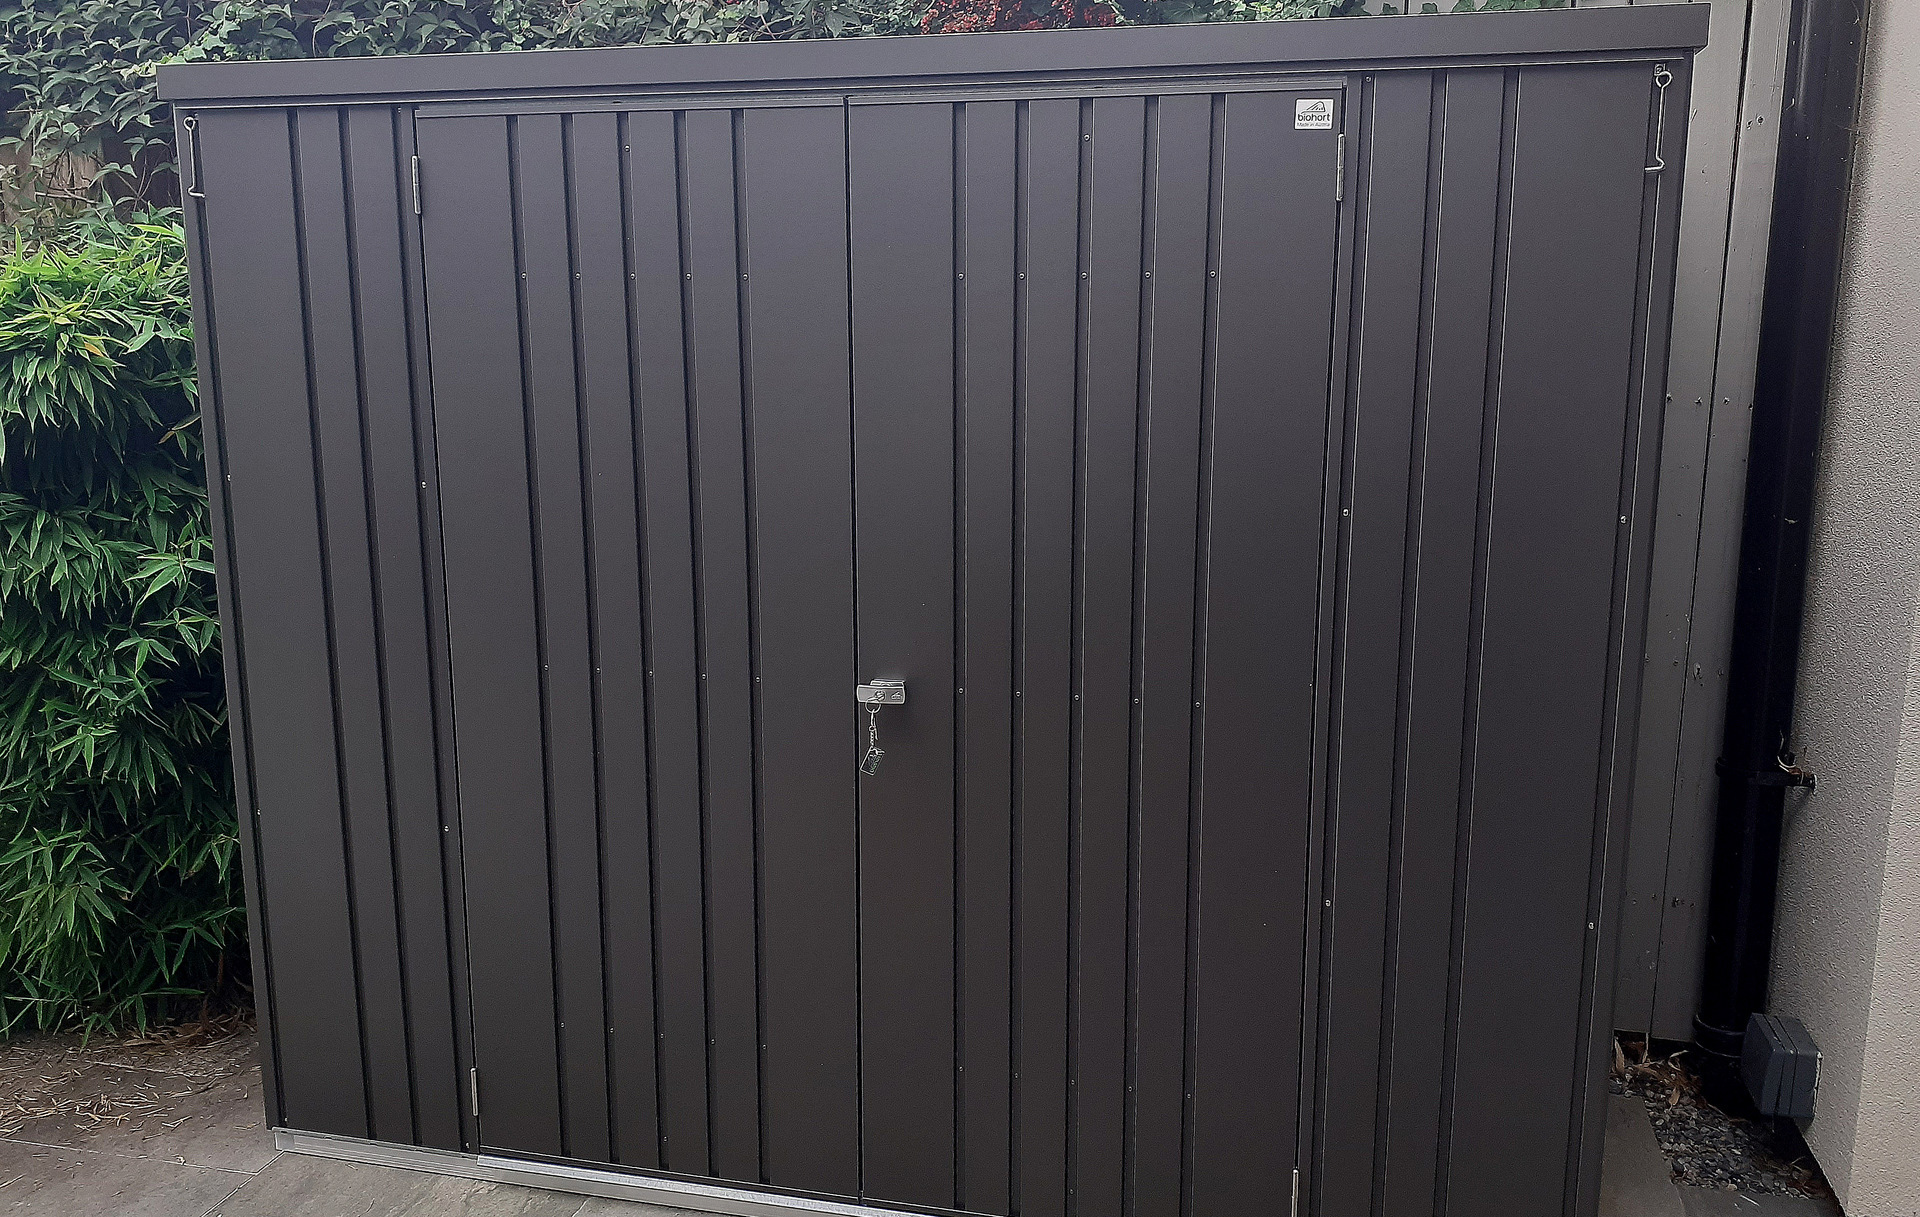 The superb quality and style of the Biohort Equipment Locker 230 in metallic dark grey  with optional accessories including aluminium floor frame, aluminium floor panels | supplied + installed in Terenure, Dublin 6W by Owen Chubb Landscapers. Tel 087-2306 128.